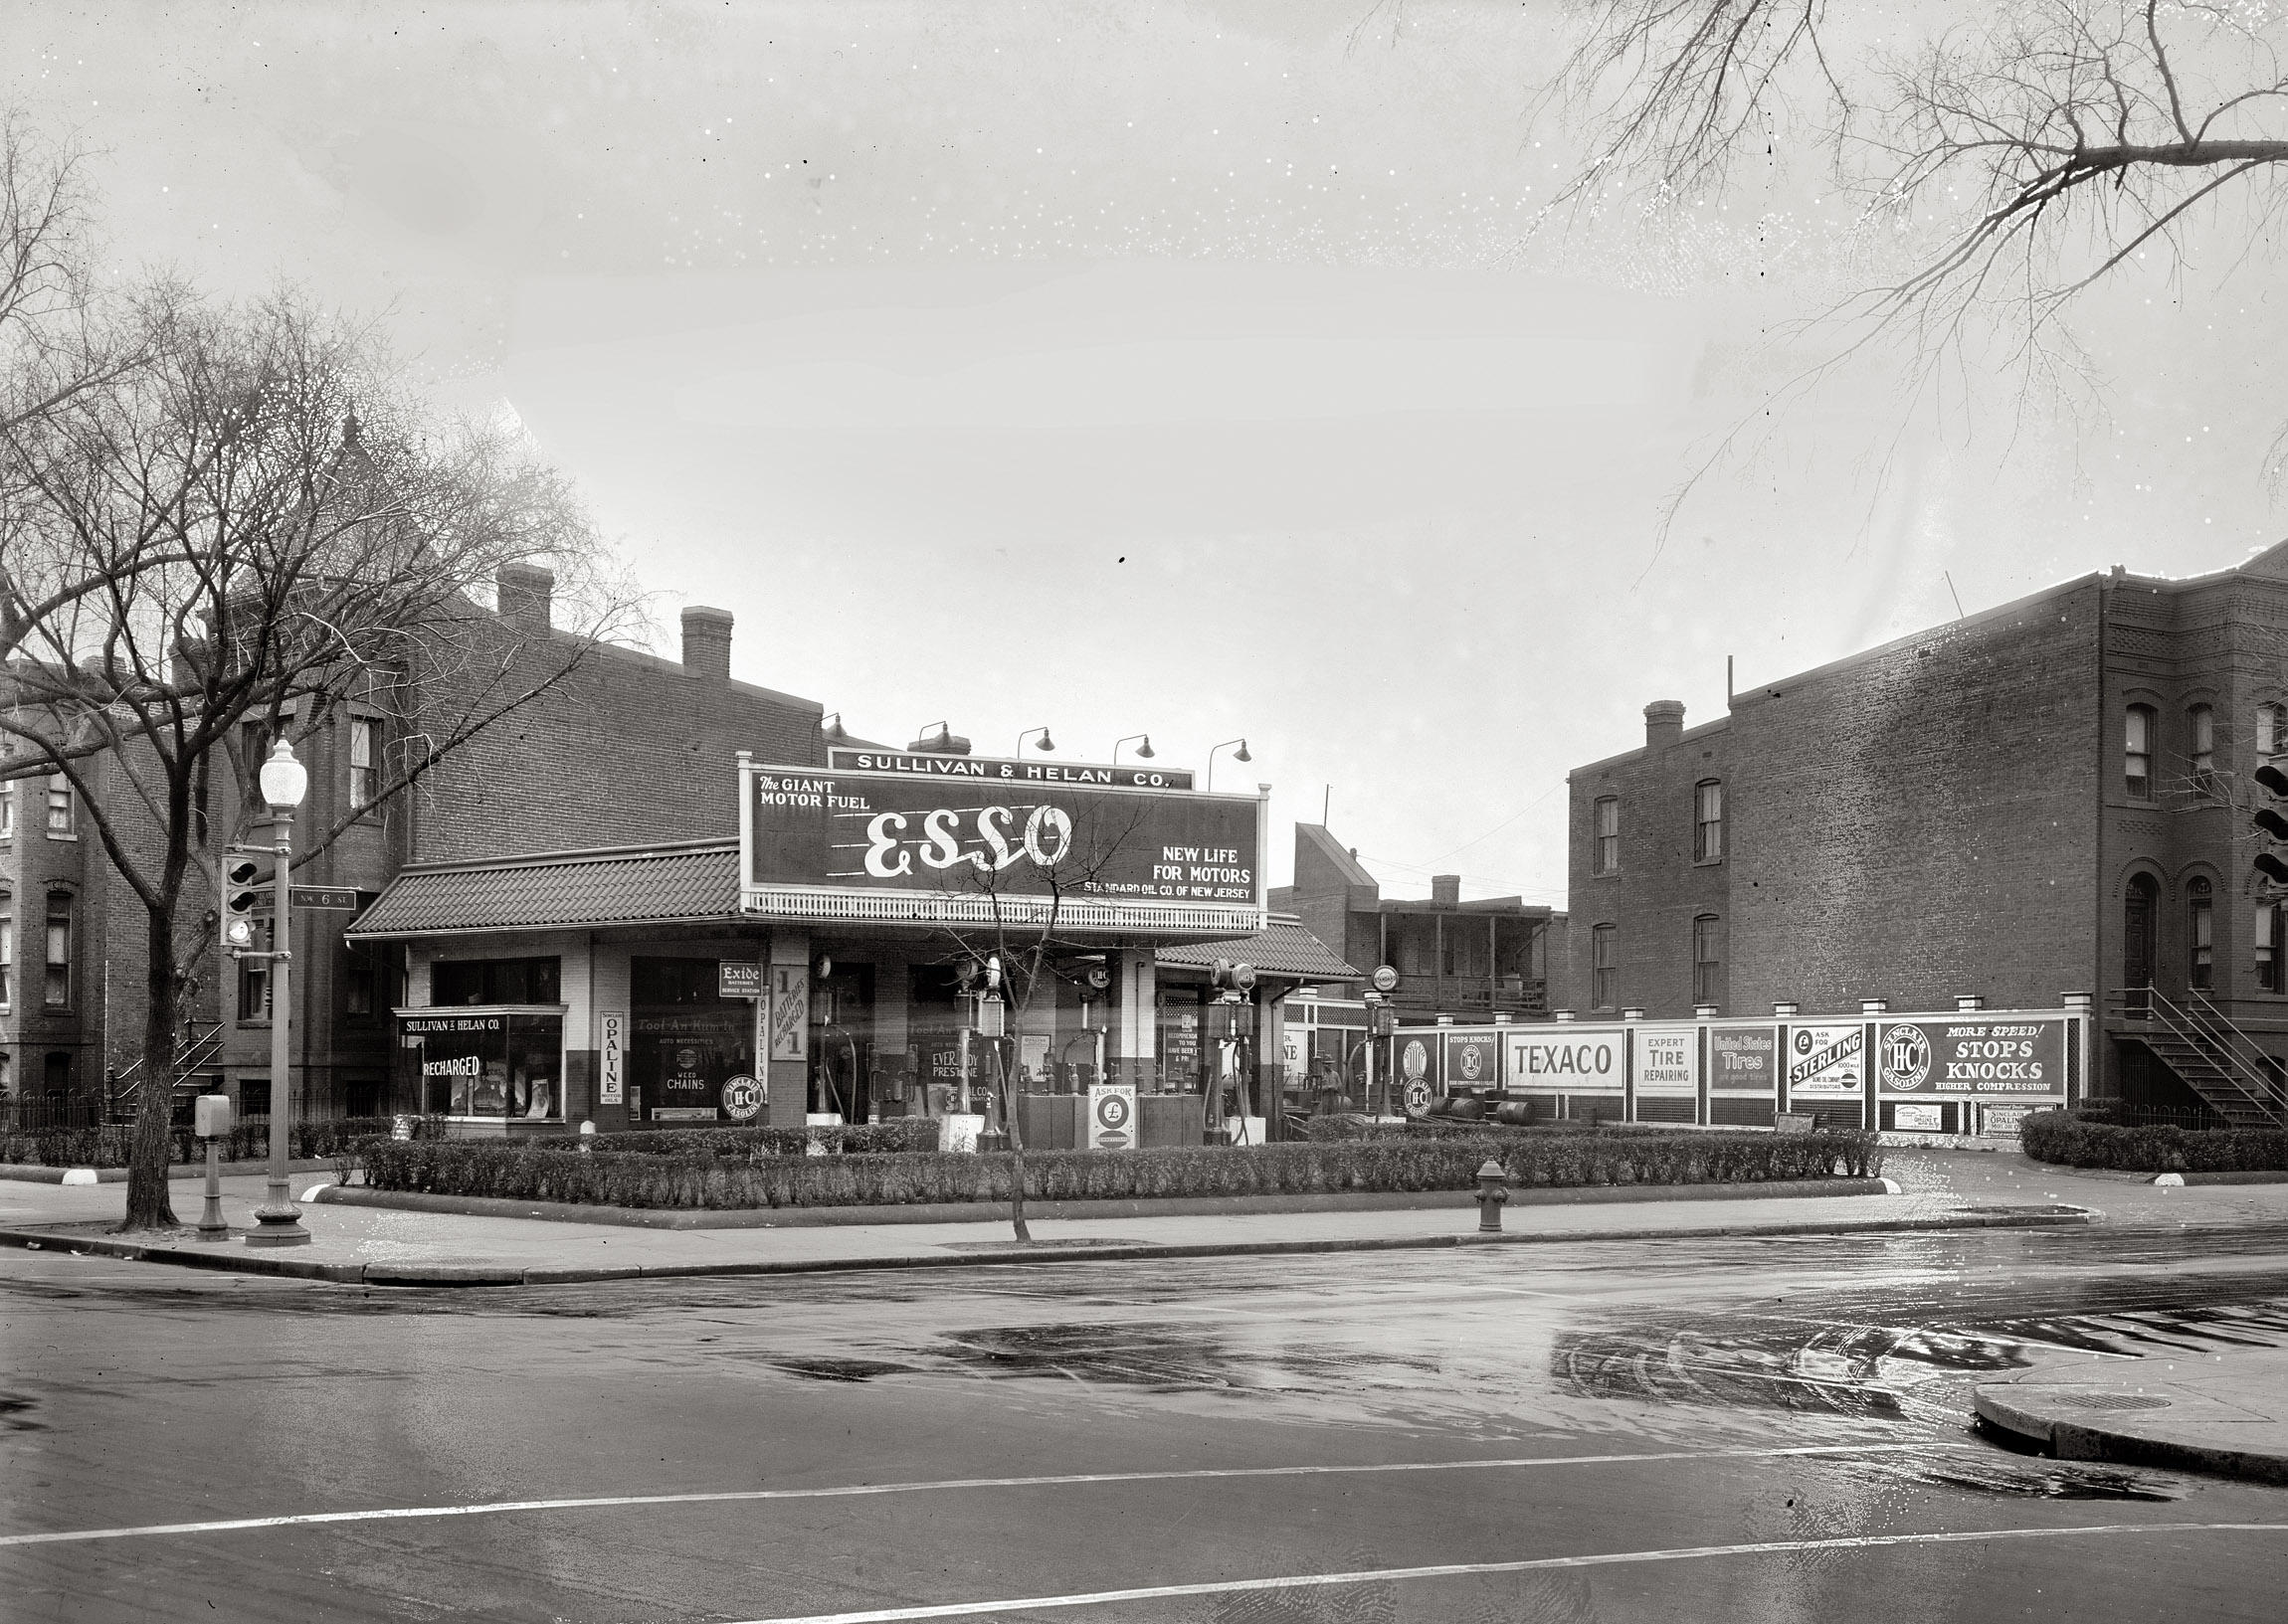 Washington, D.C., circa 1928. "Hedges & Middleton. Sullivan & Helan Co." Service station at Sixth Street and Rhode Island Avenue N.W. Note the traffic light with bottom lens labeled "GO." View full size. National Photo Co. glass negative.